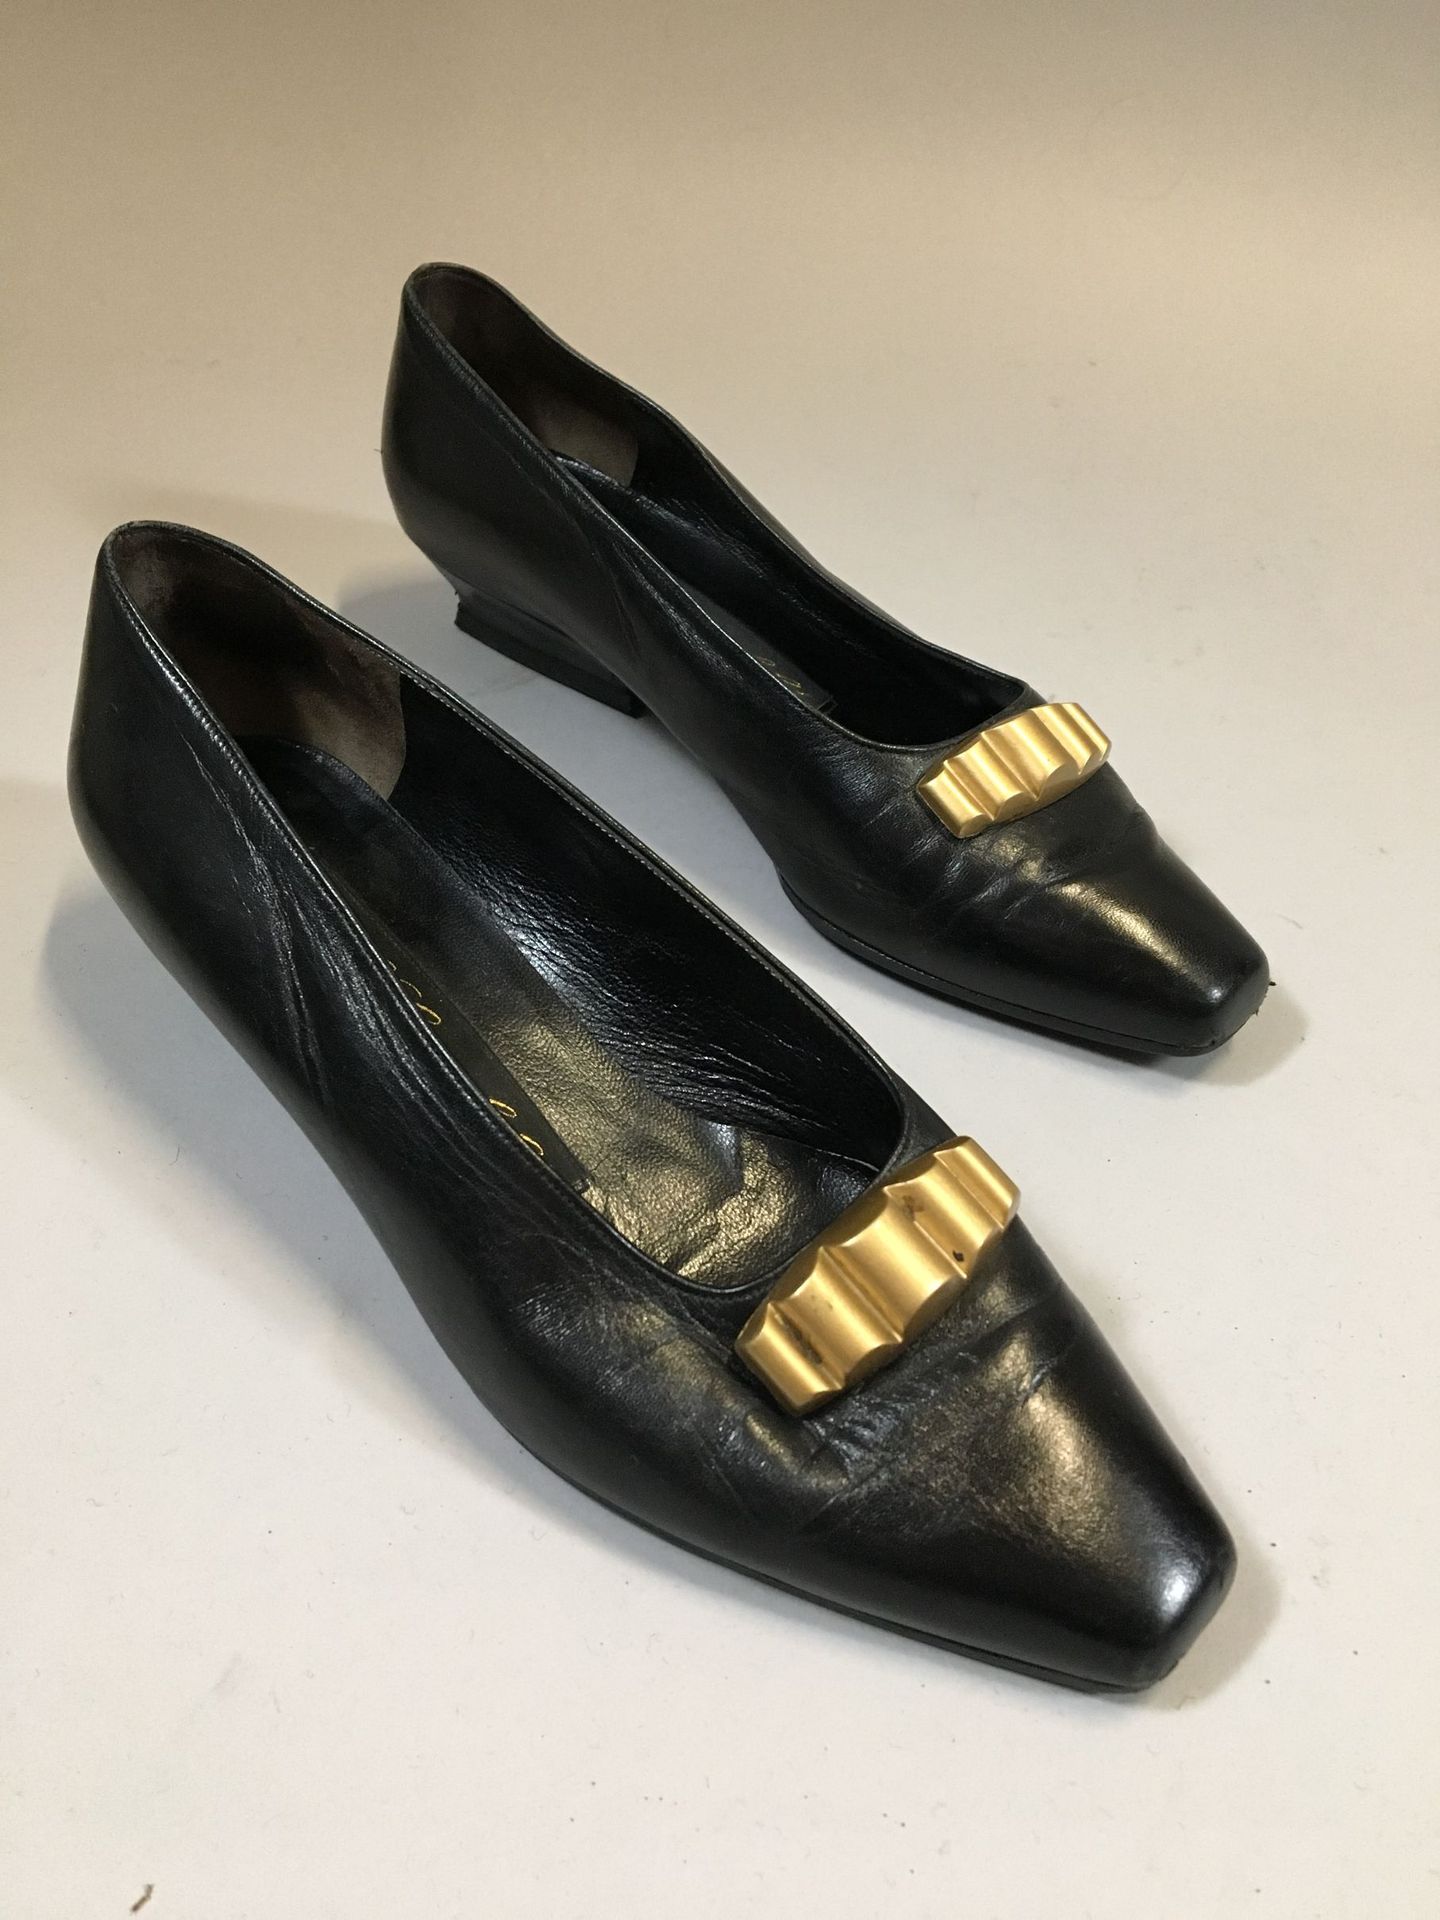 Null Karl LAGERFELD
Pair of black leather pumps. Size 37